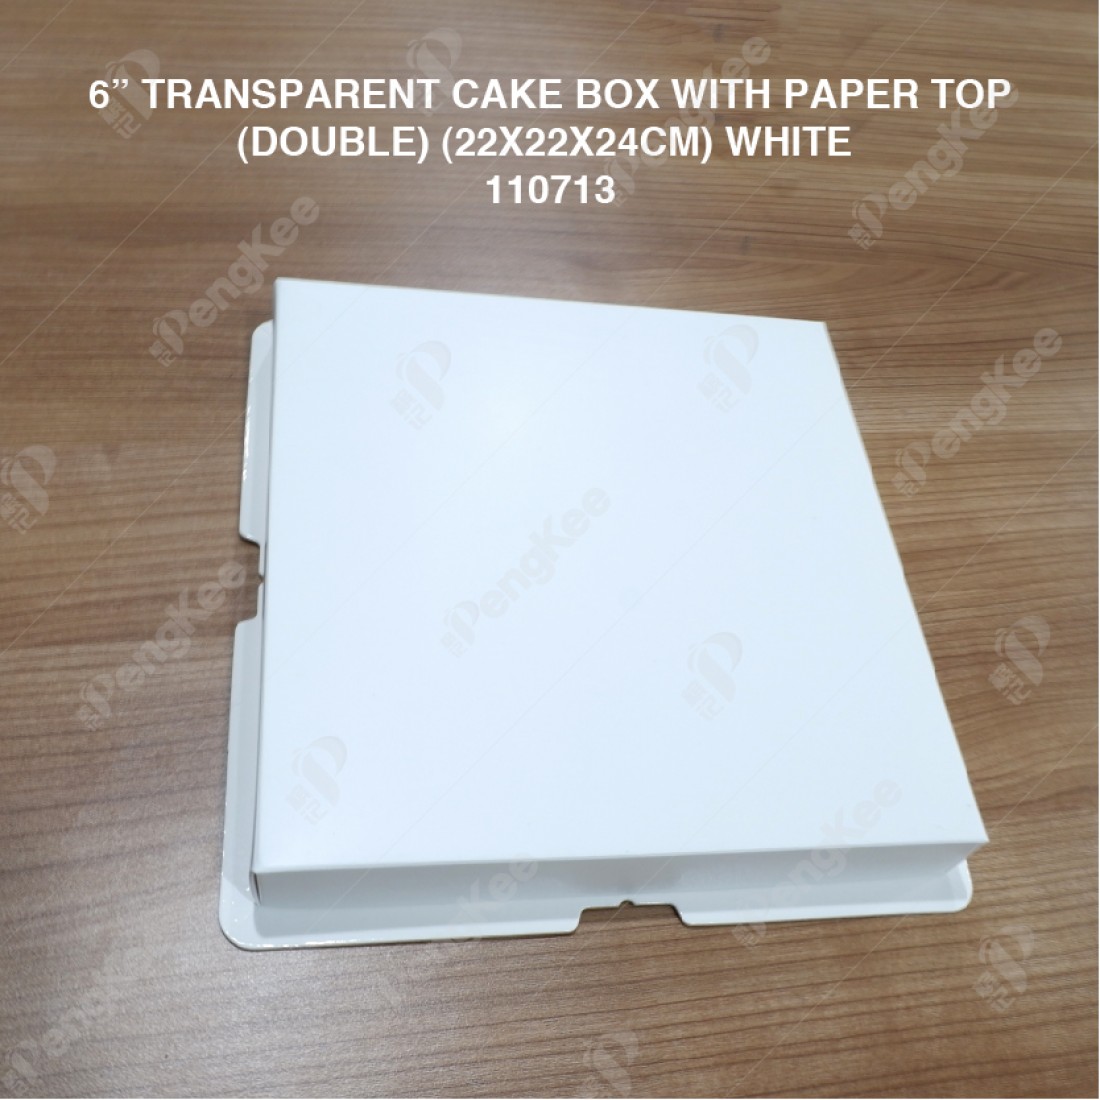 6" TRANSPARENT CAKE BOX WITH PAPER TOP(DOUBLE) (22*22*24CM)- WHITE